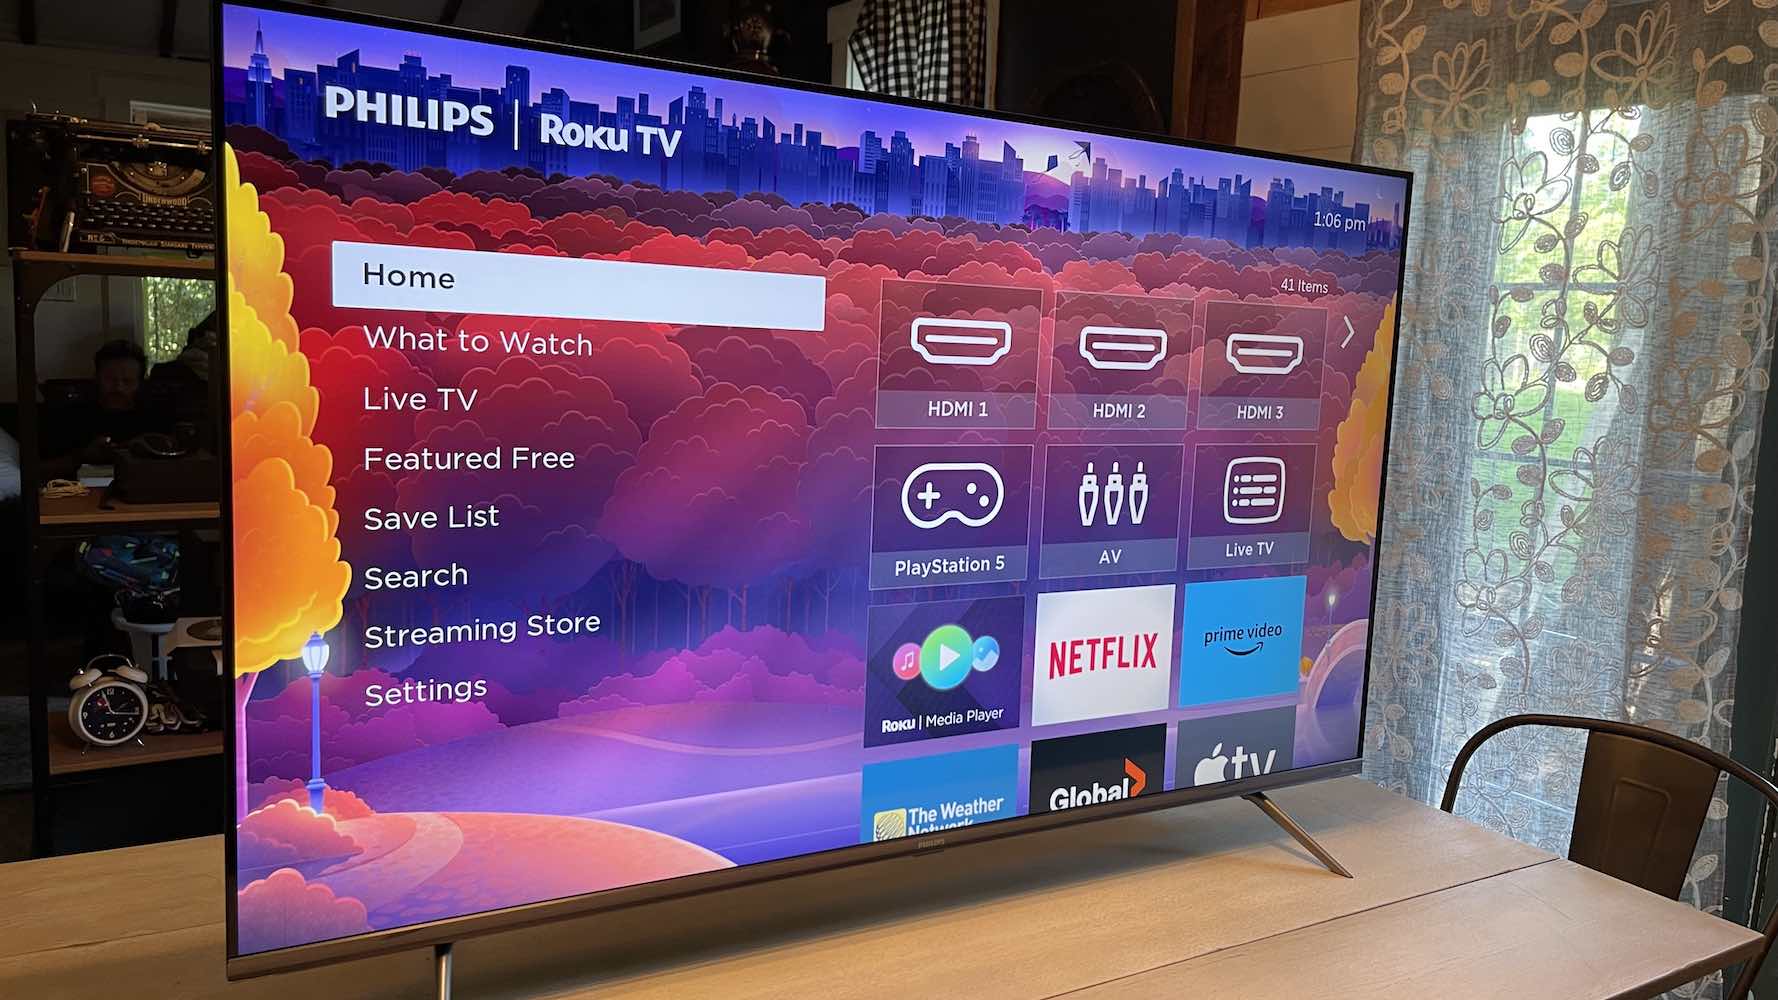 Philips Roku 4K QLED TV review